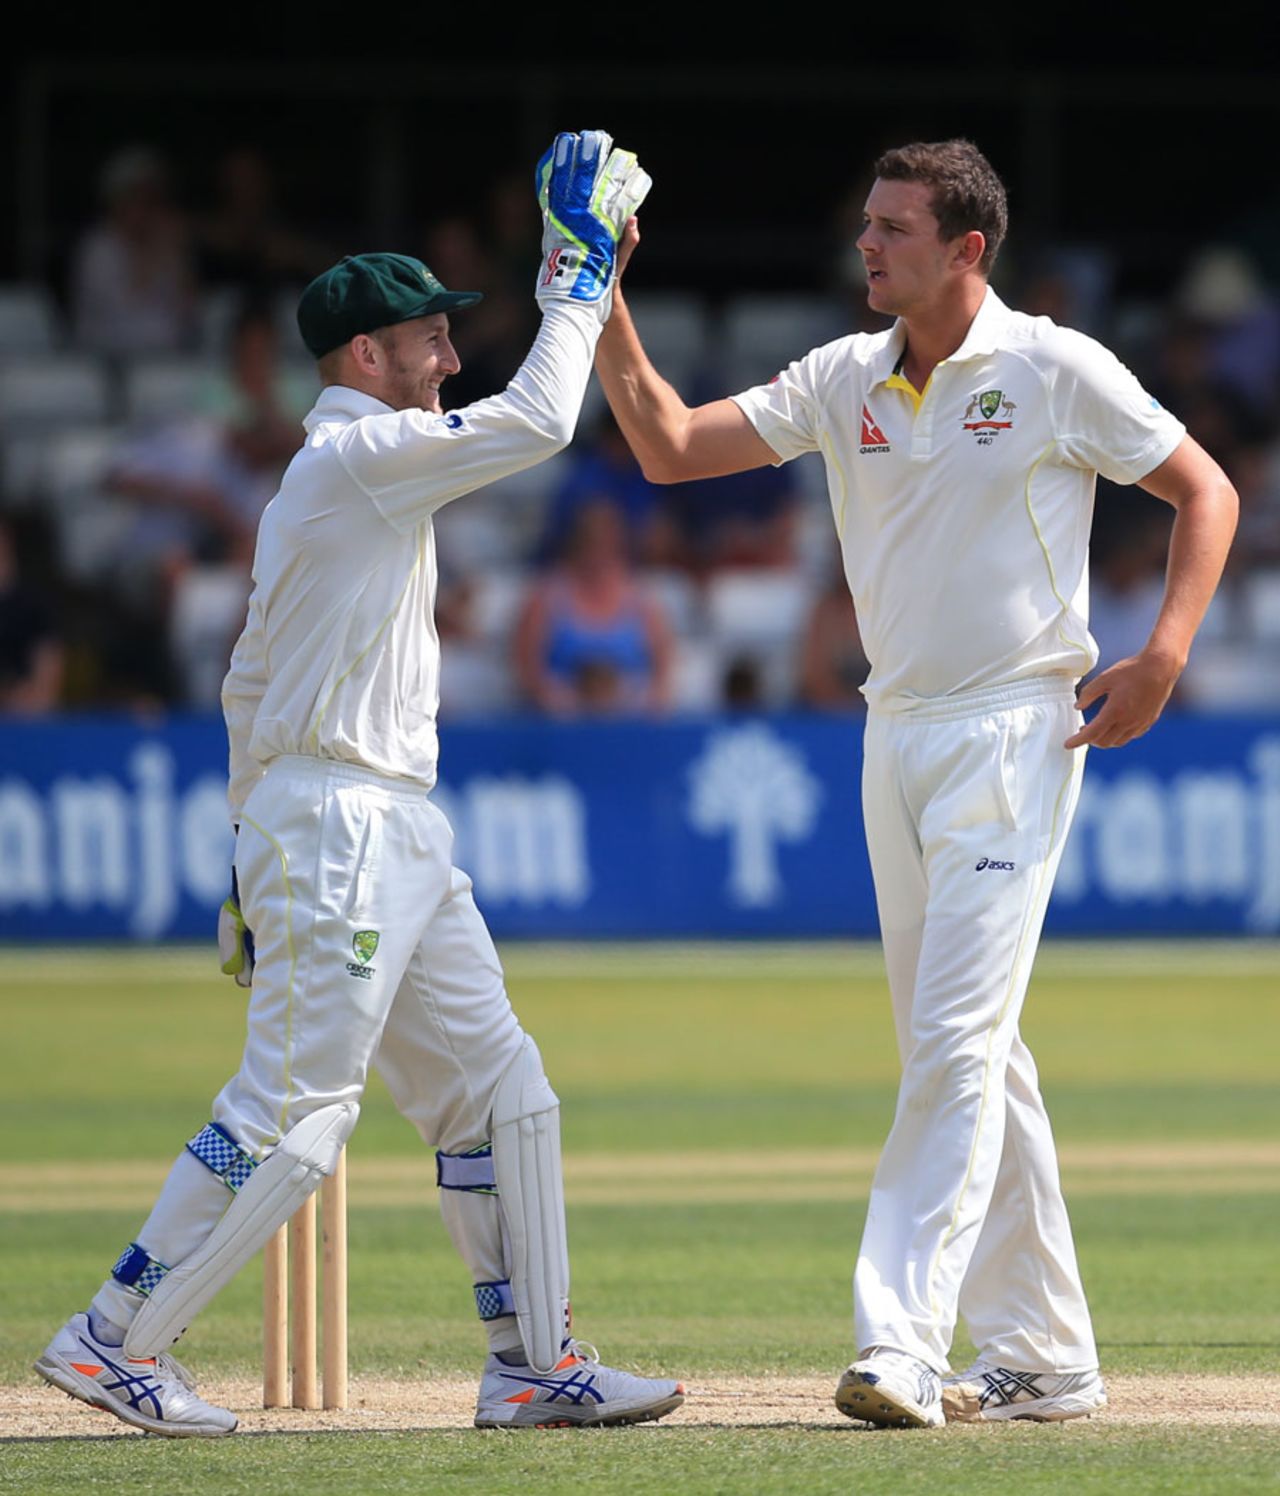 Josh Hazlewood gets a high five from Peter Nevill, Essex v Australians, Tour match, 4th day, Chelmsford, July 4, 2015